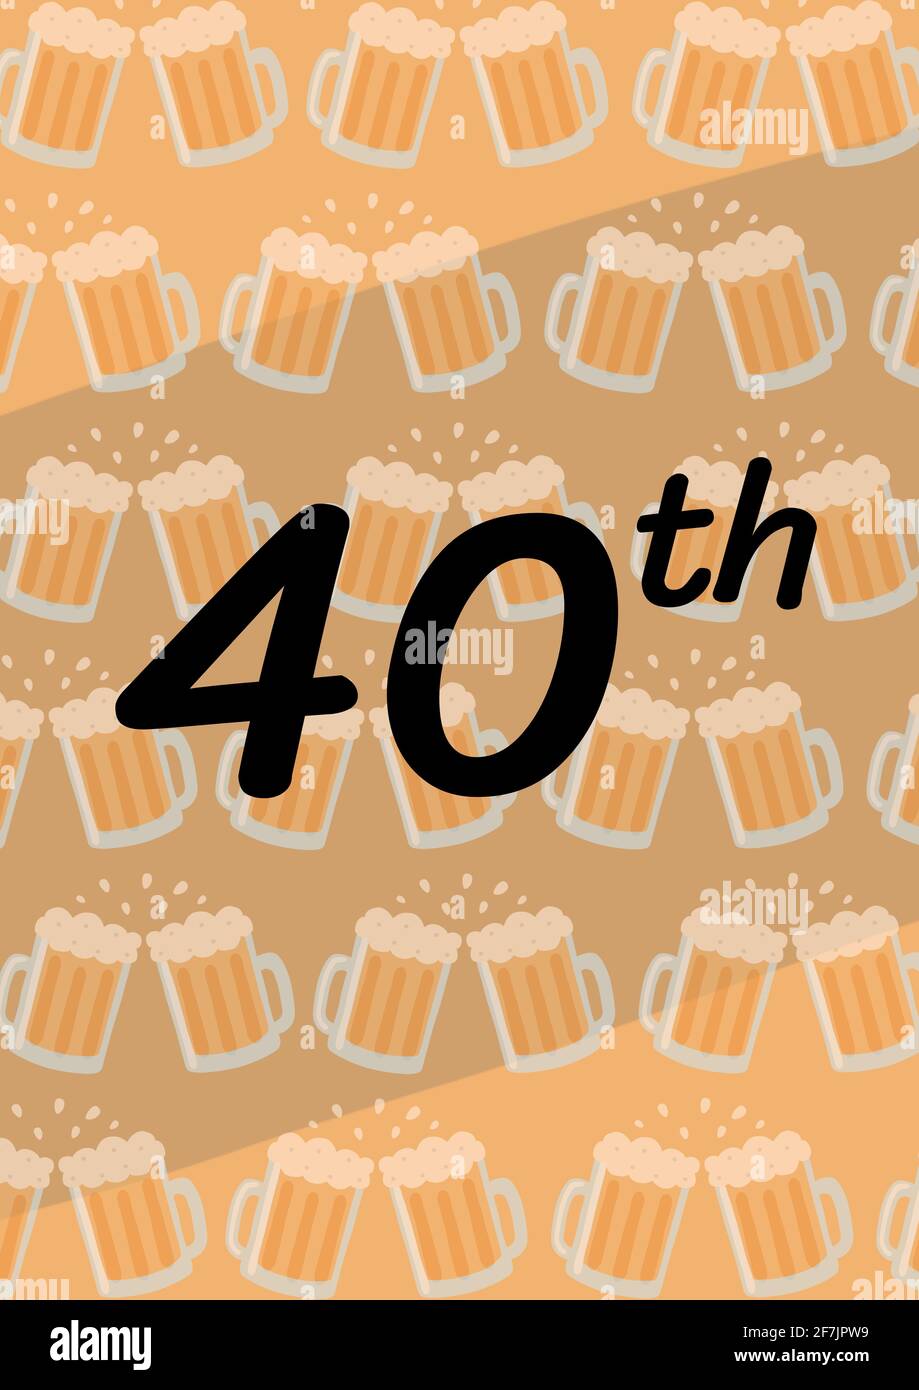 40th written in black with chinking beer mugs in repeat on pale brown background Stock Photo